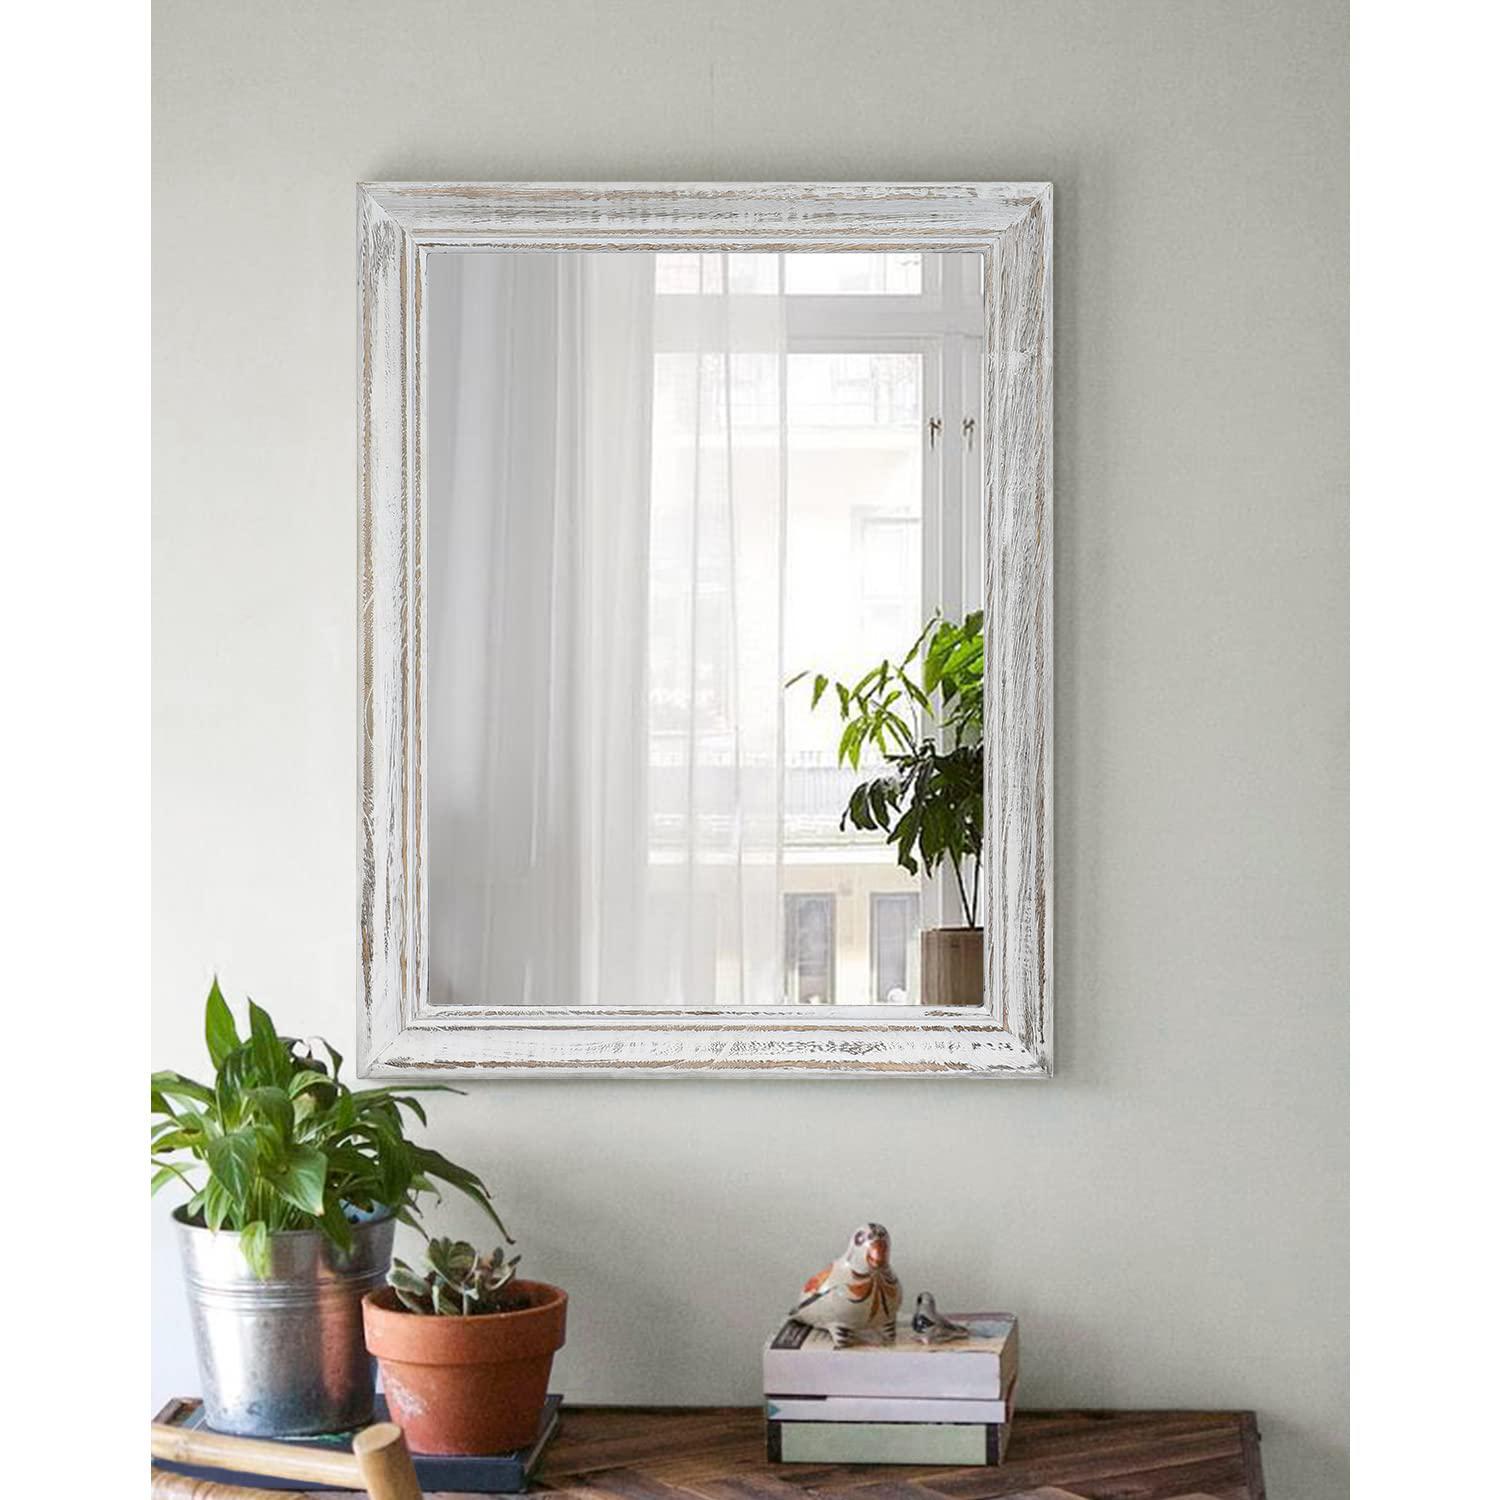 mwazzll wall mirror with rustic wood frame rectangle mirrors for wall decorative hanging mirror for bathroom bedroom farmhous